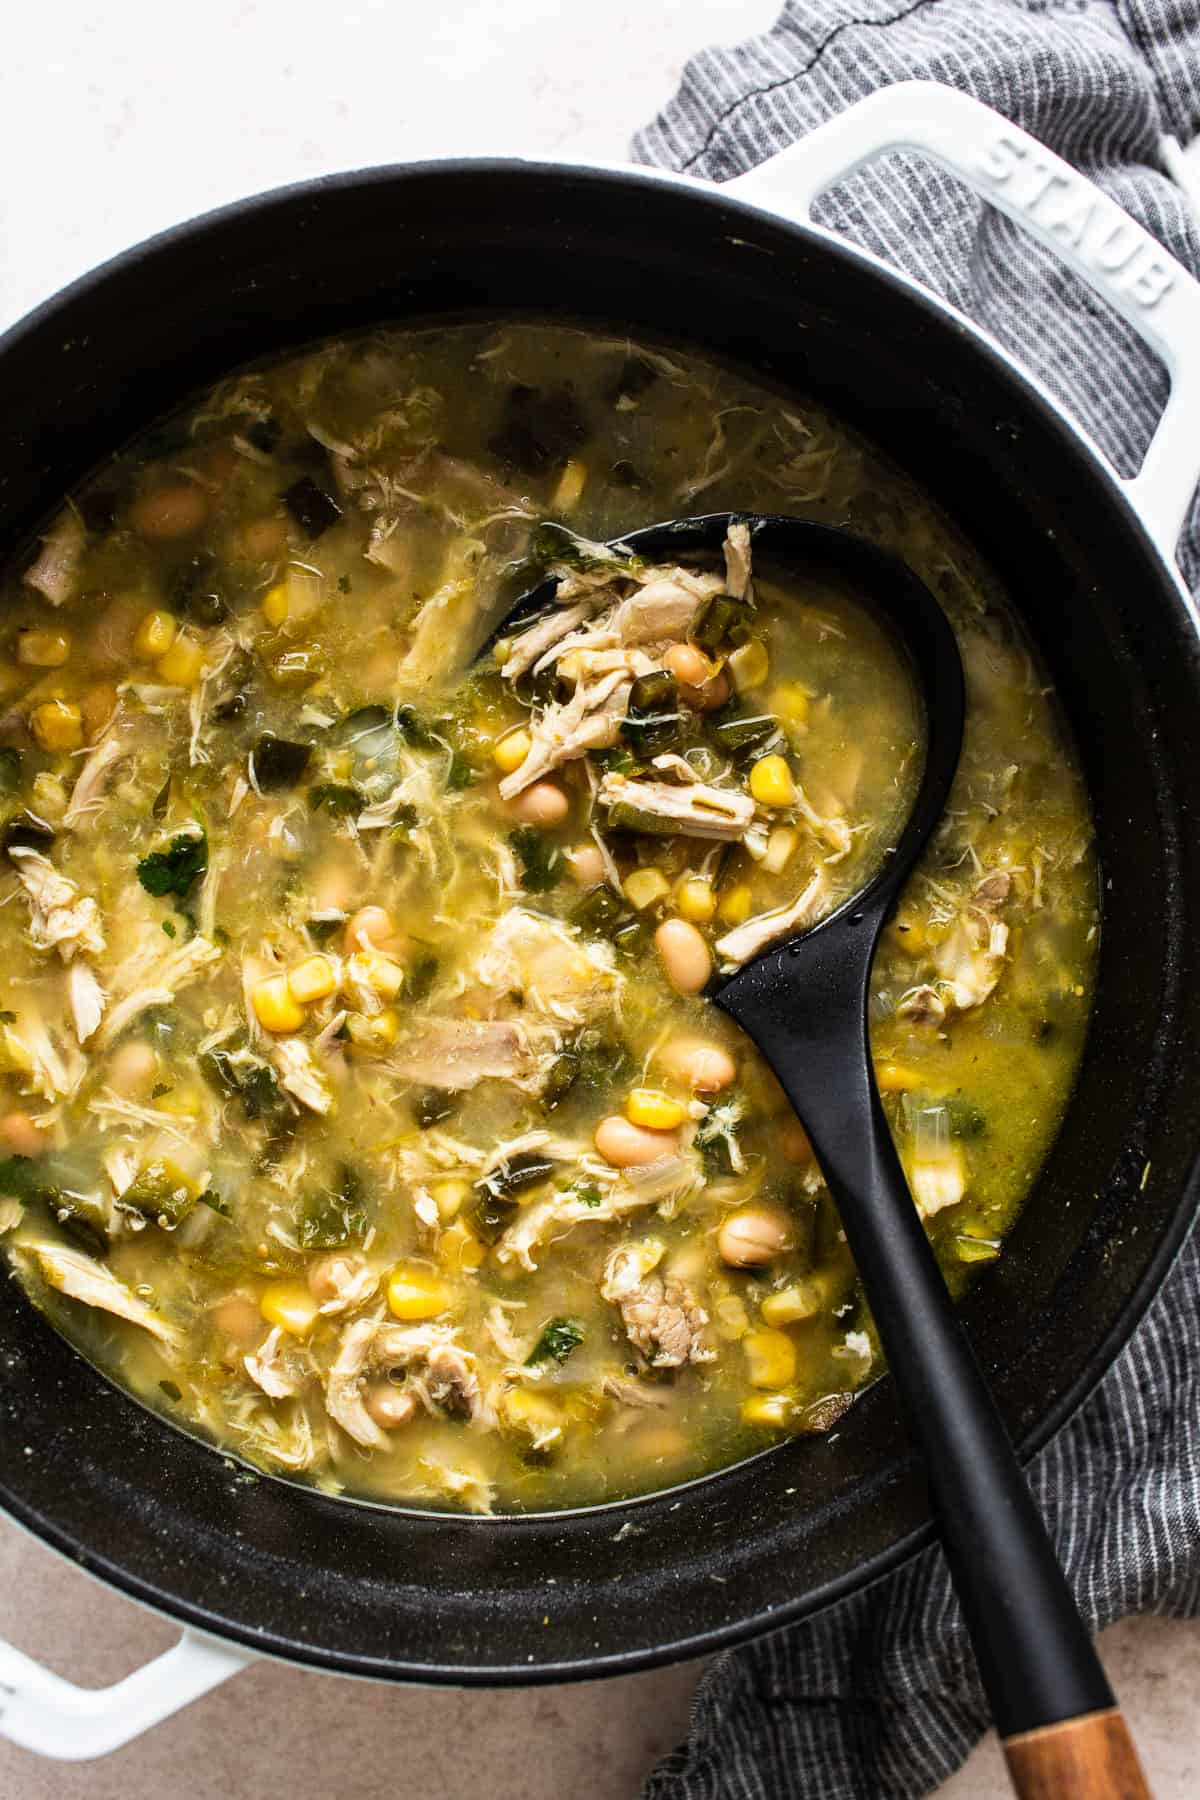 Green chicken chili in a large pot with a ladle.